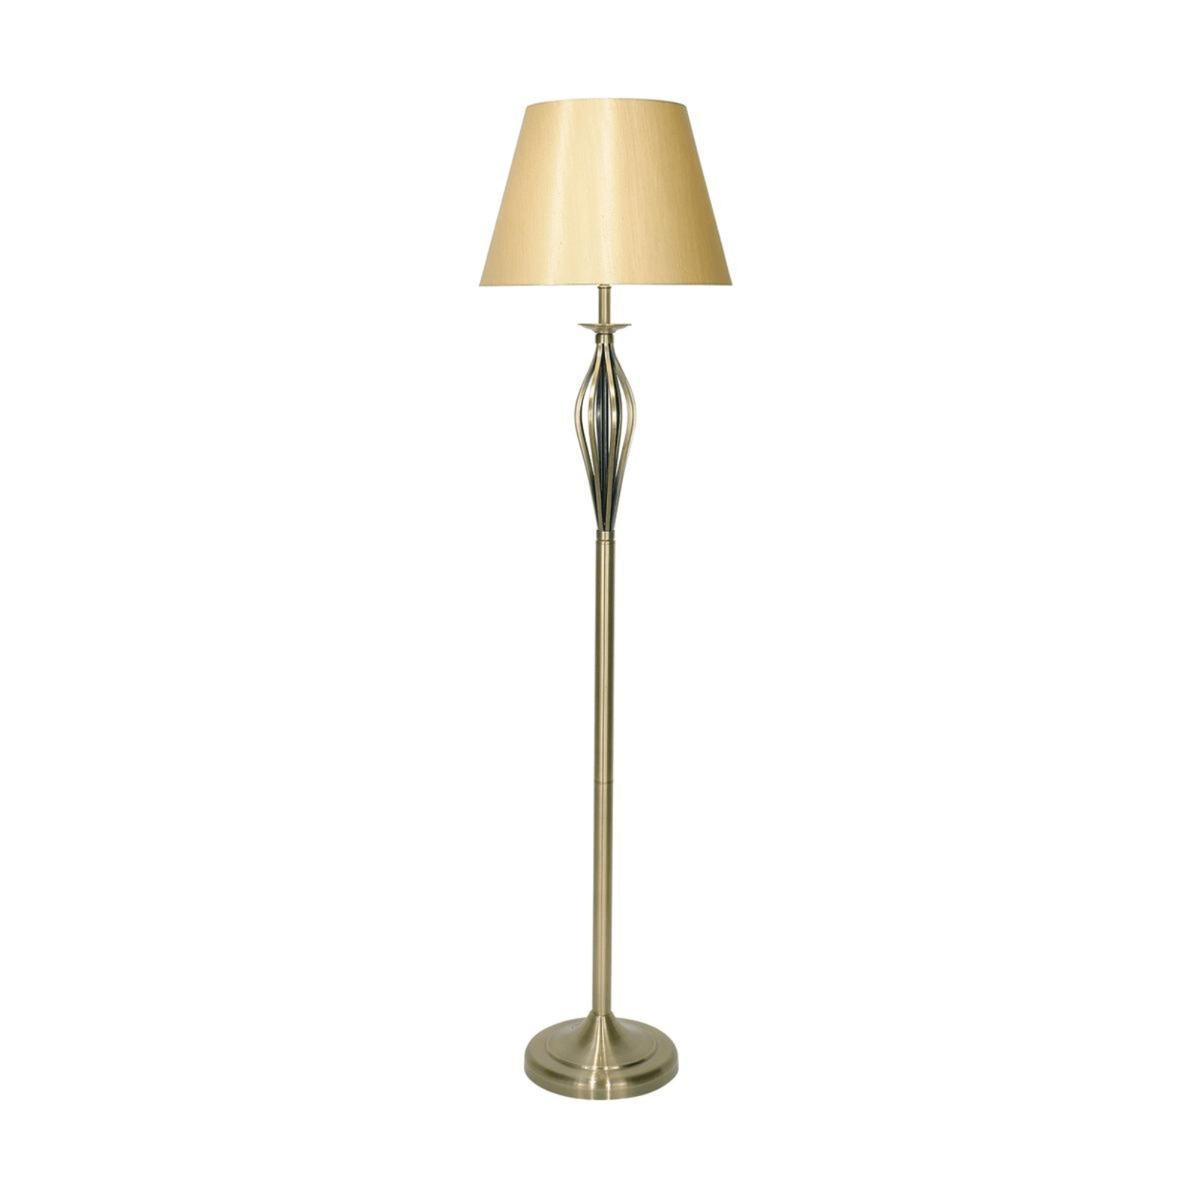 Dar Bybliss Floor Lamp Antique Brass complete with Gold Shade - Cusack Lighting